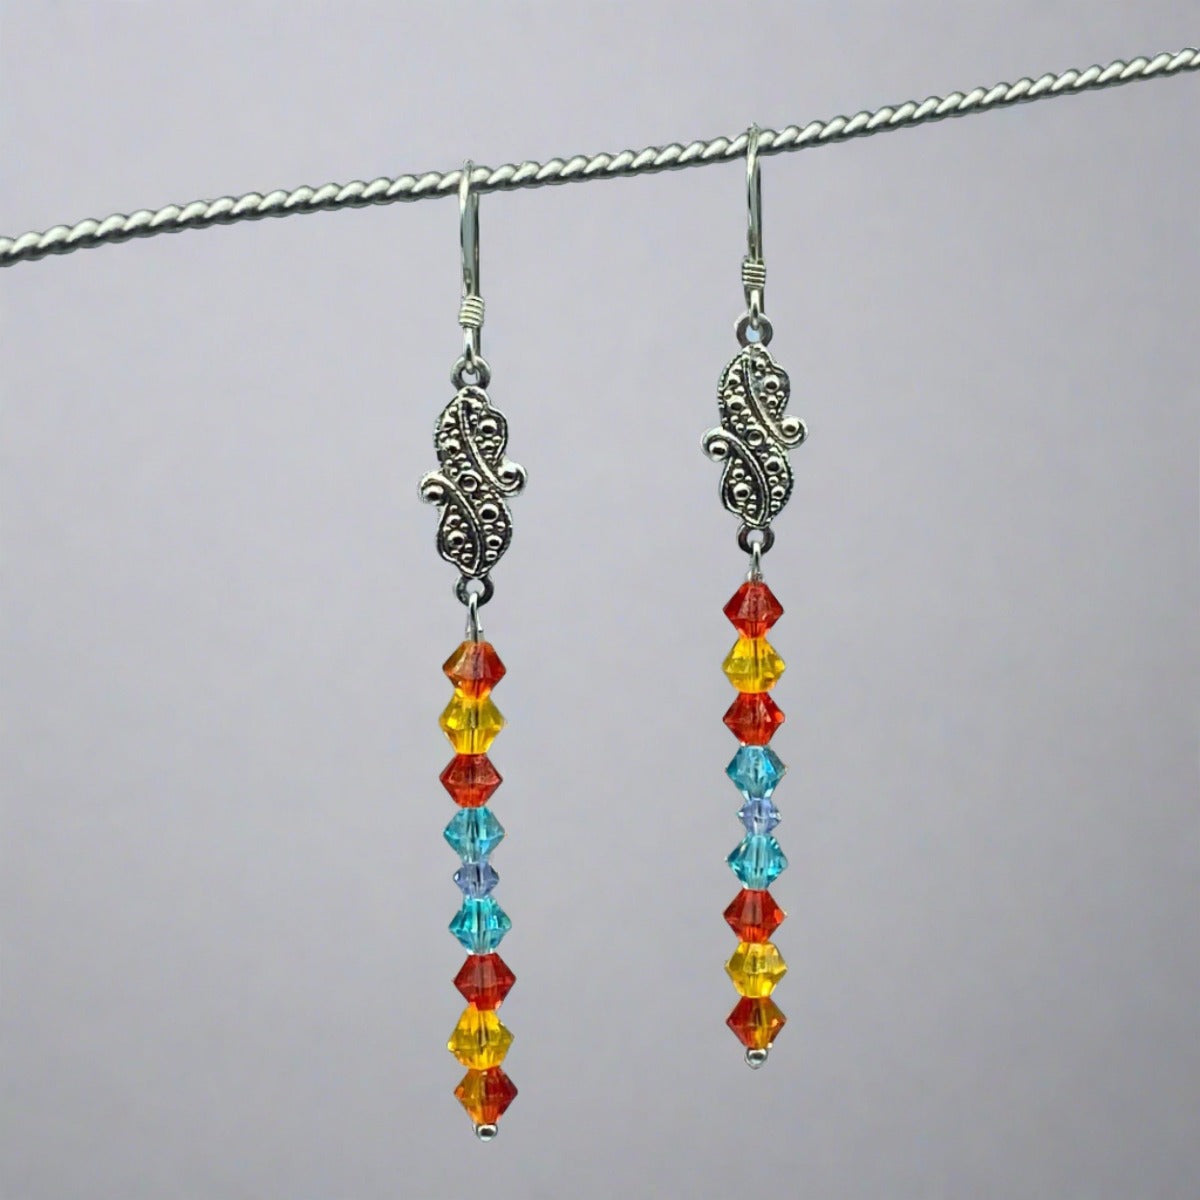 Pair of colorful chandelier beach-inspired earrings featuring shimmering crystals